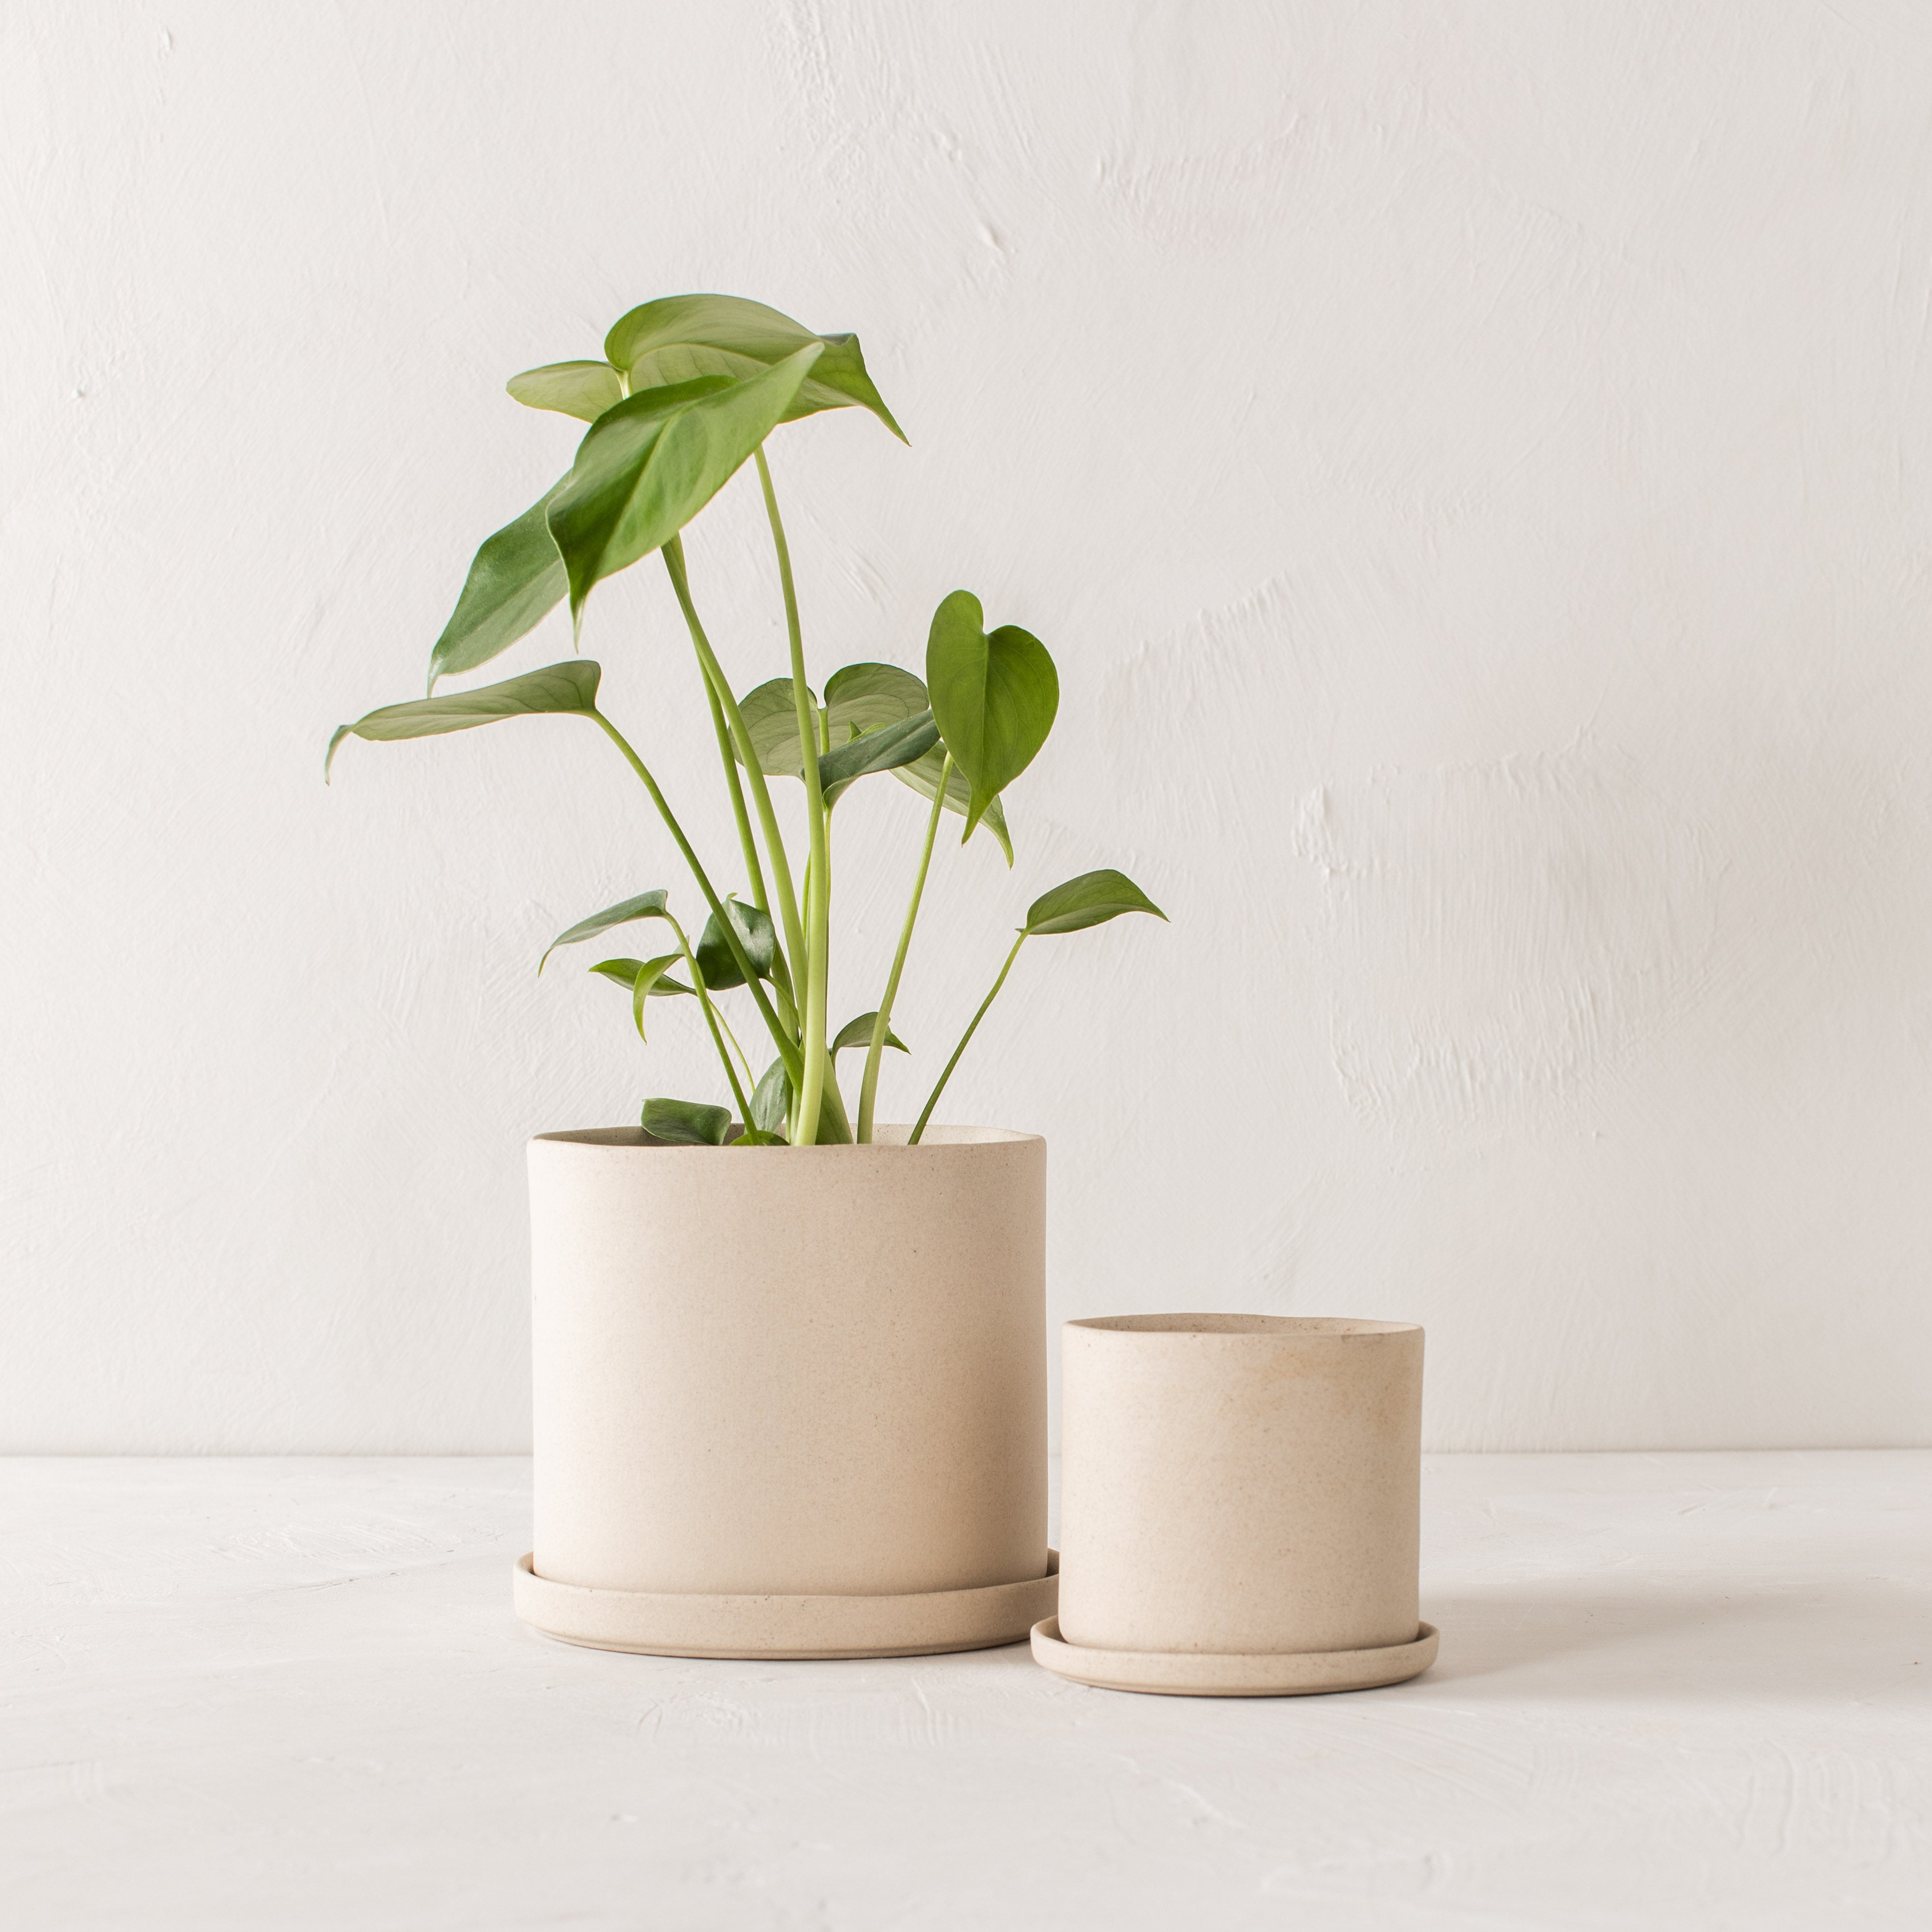 Four inch and 6 inch stoneware ceramic planter side by side. Both have drainage dishes. Six inch has a monstera plant, and the four inch is empty. Both on a plaster textured back drop and tabletop. Handmade ceramic planters designed by Convivial Production. Sold by Shop Verdant Kansas City, Mo plant store.